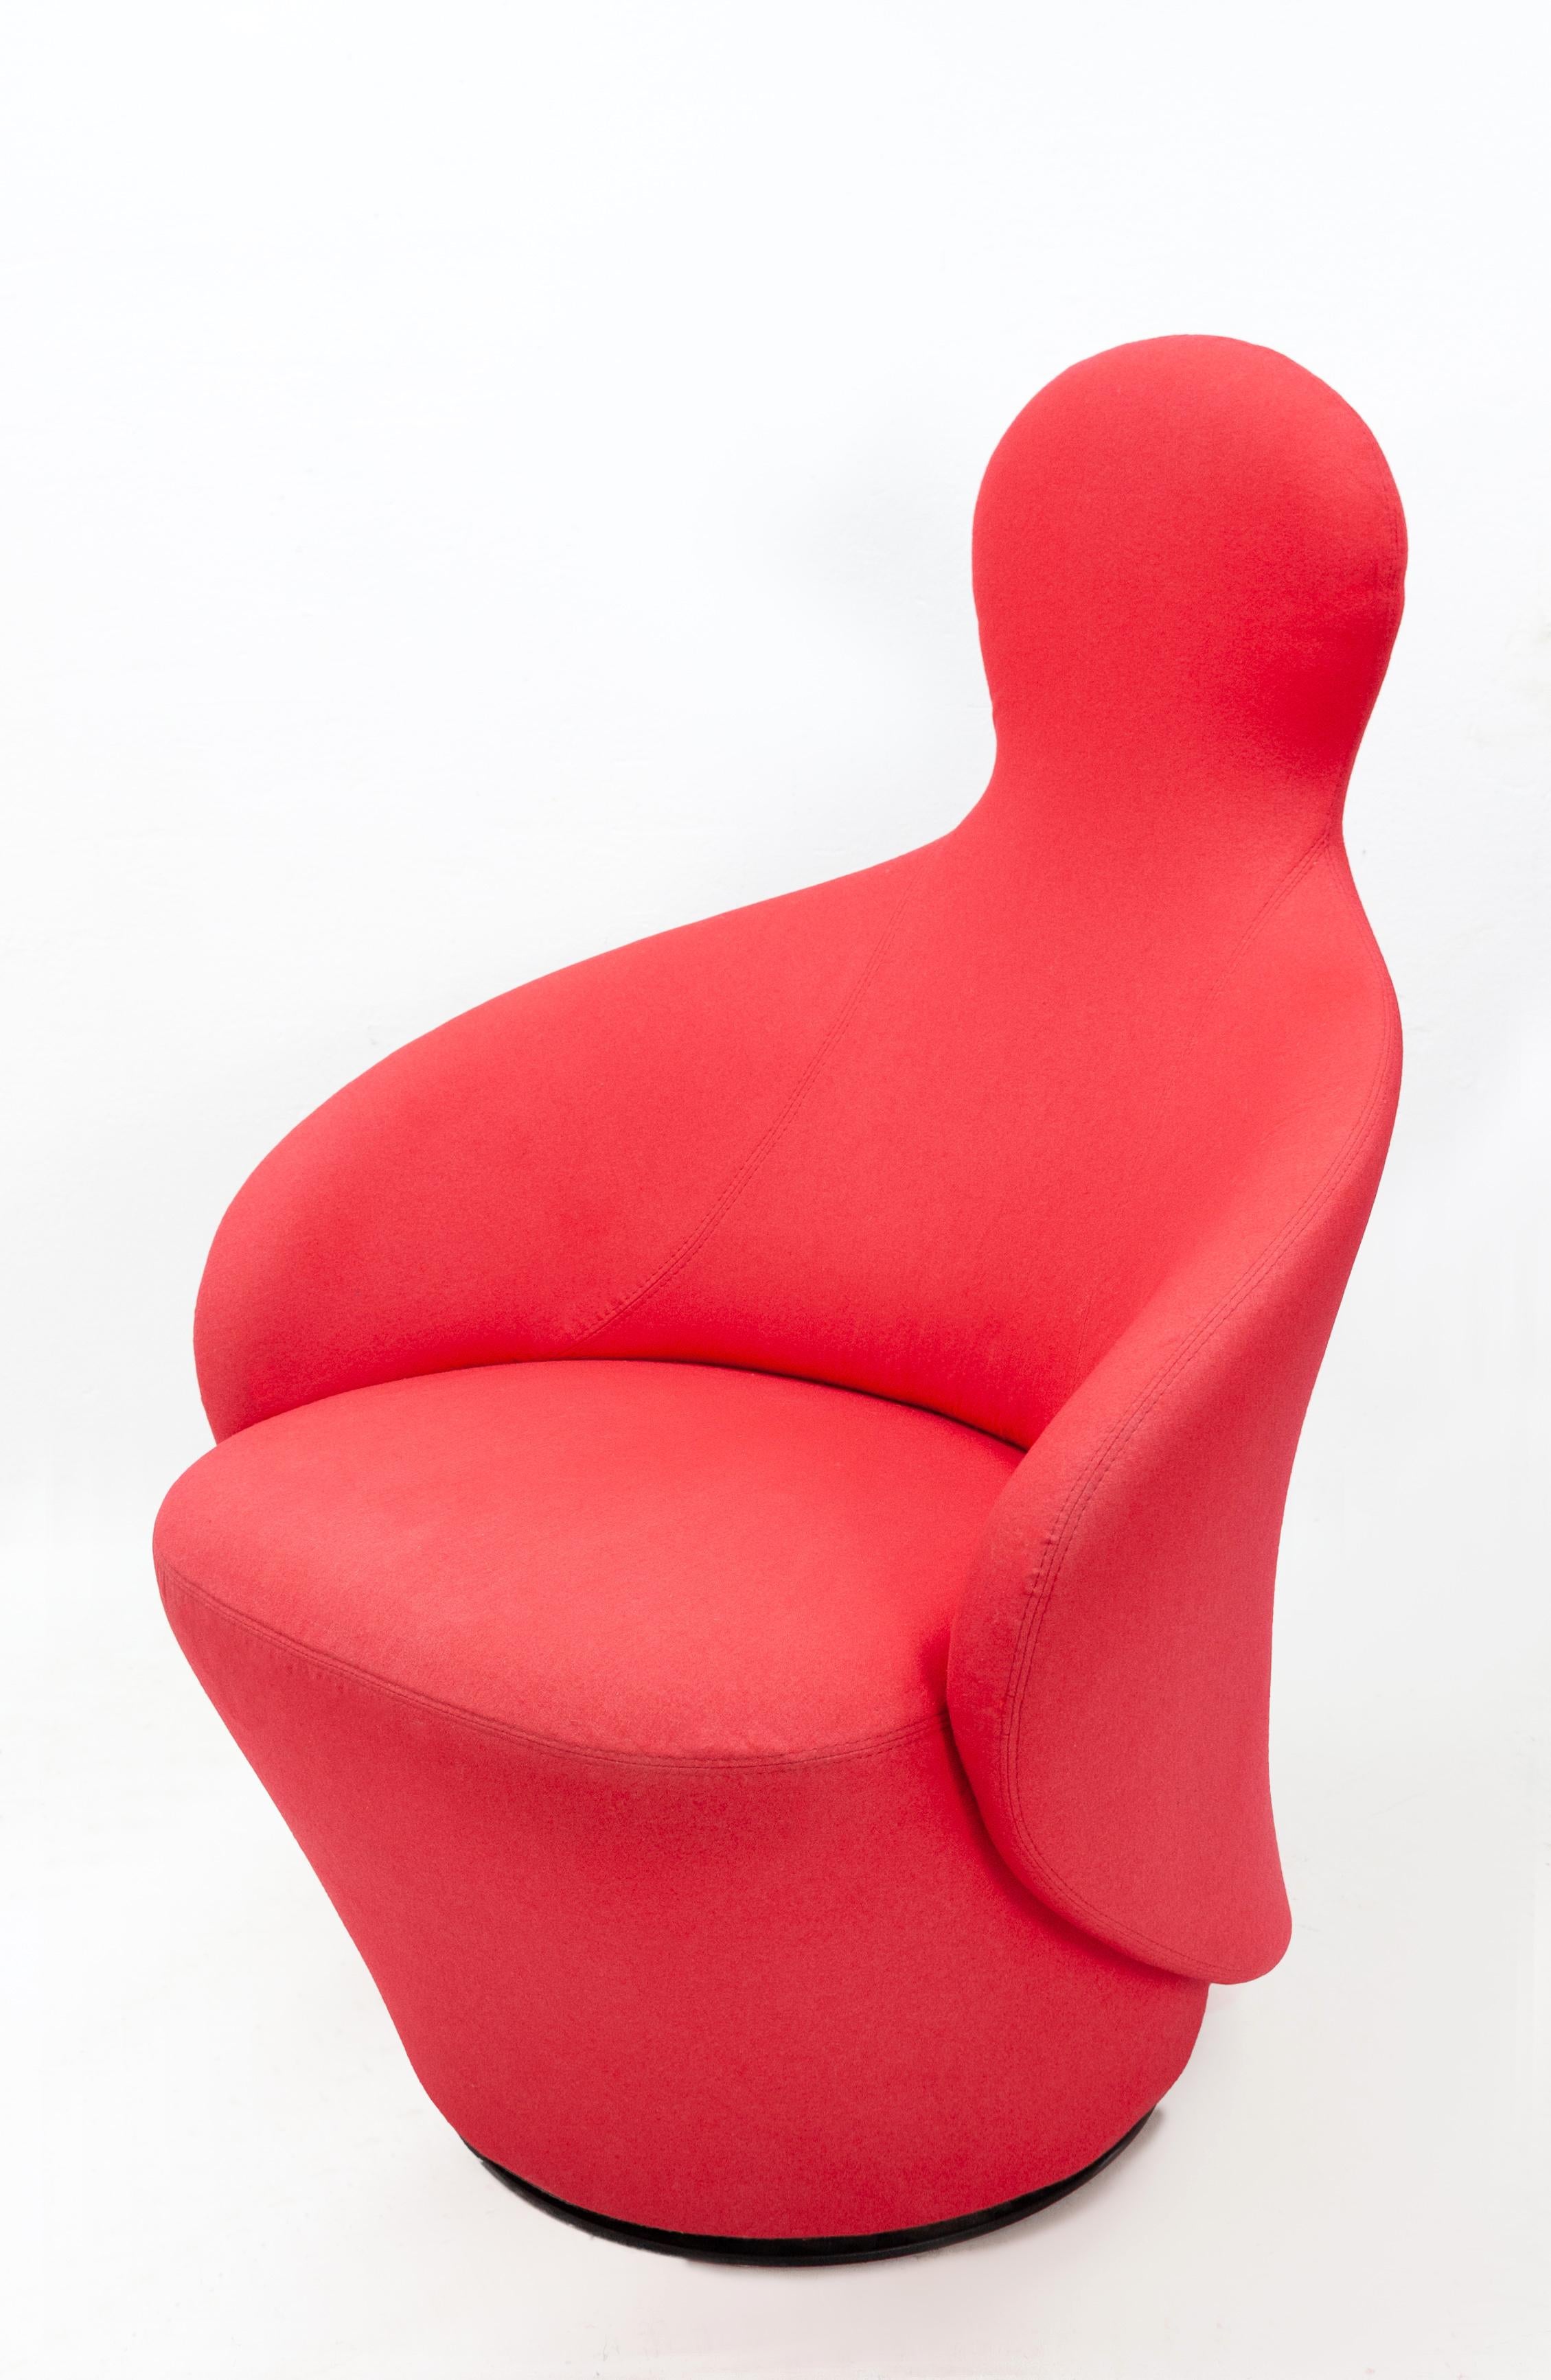 A chair that looks like it embraces you when you sit in it. Upholstered in a red felt and mounted on a rotating base.
Good condition and a quality piece.